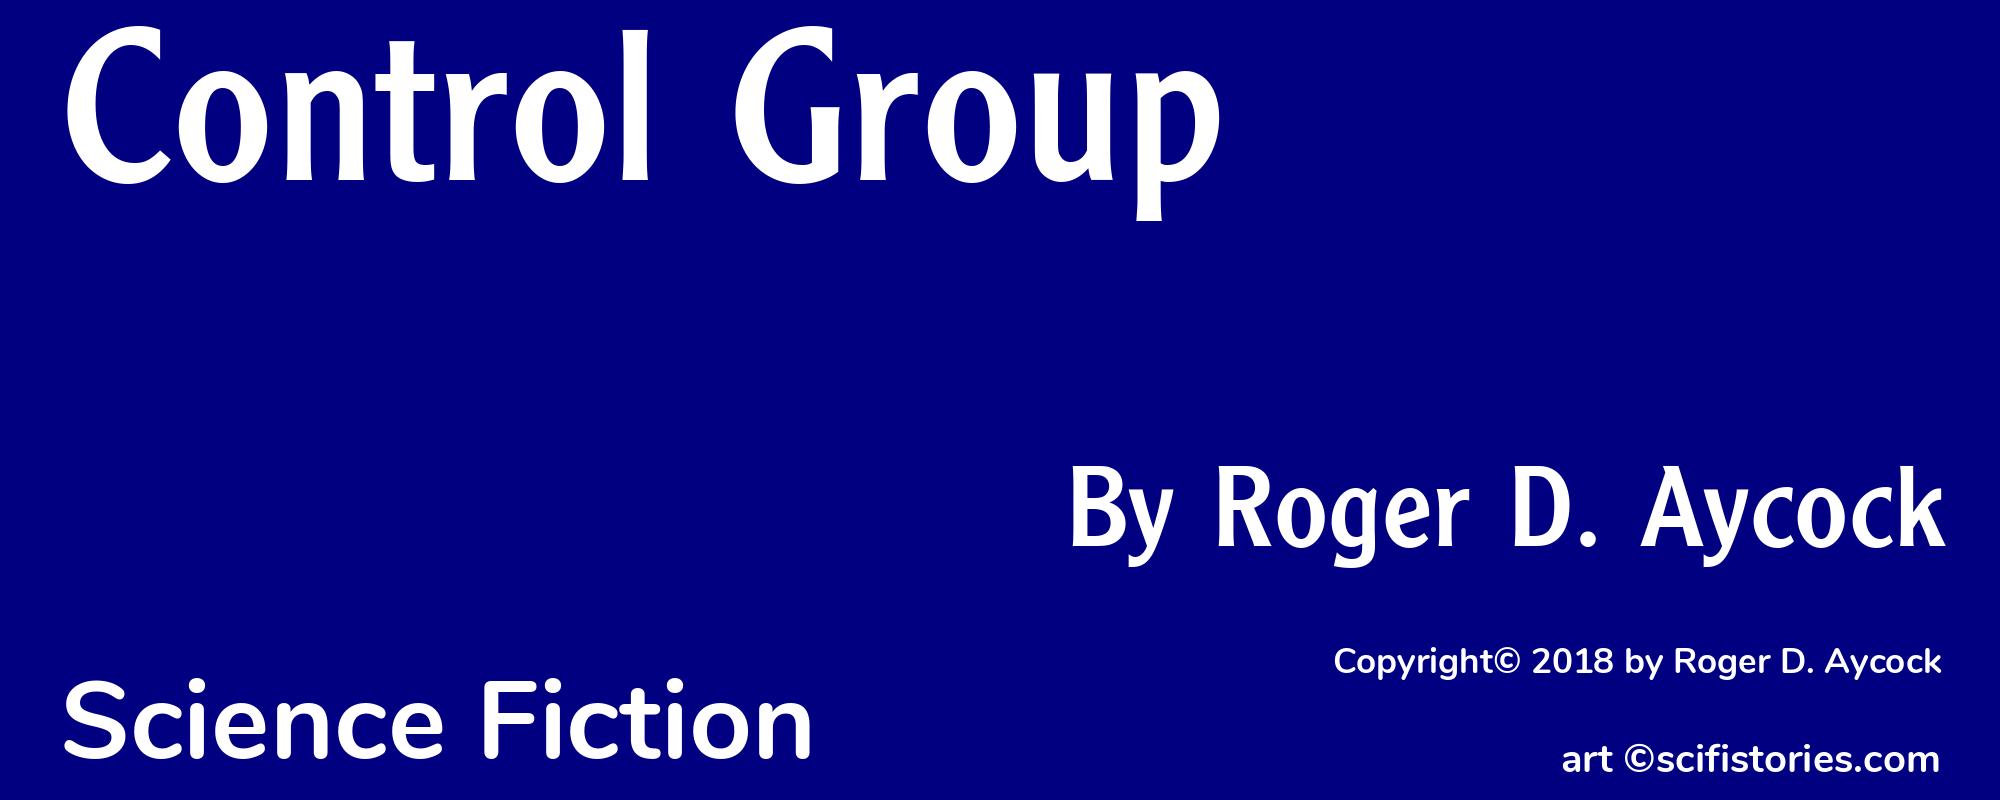 Control Group - Cover